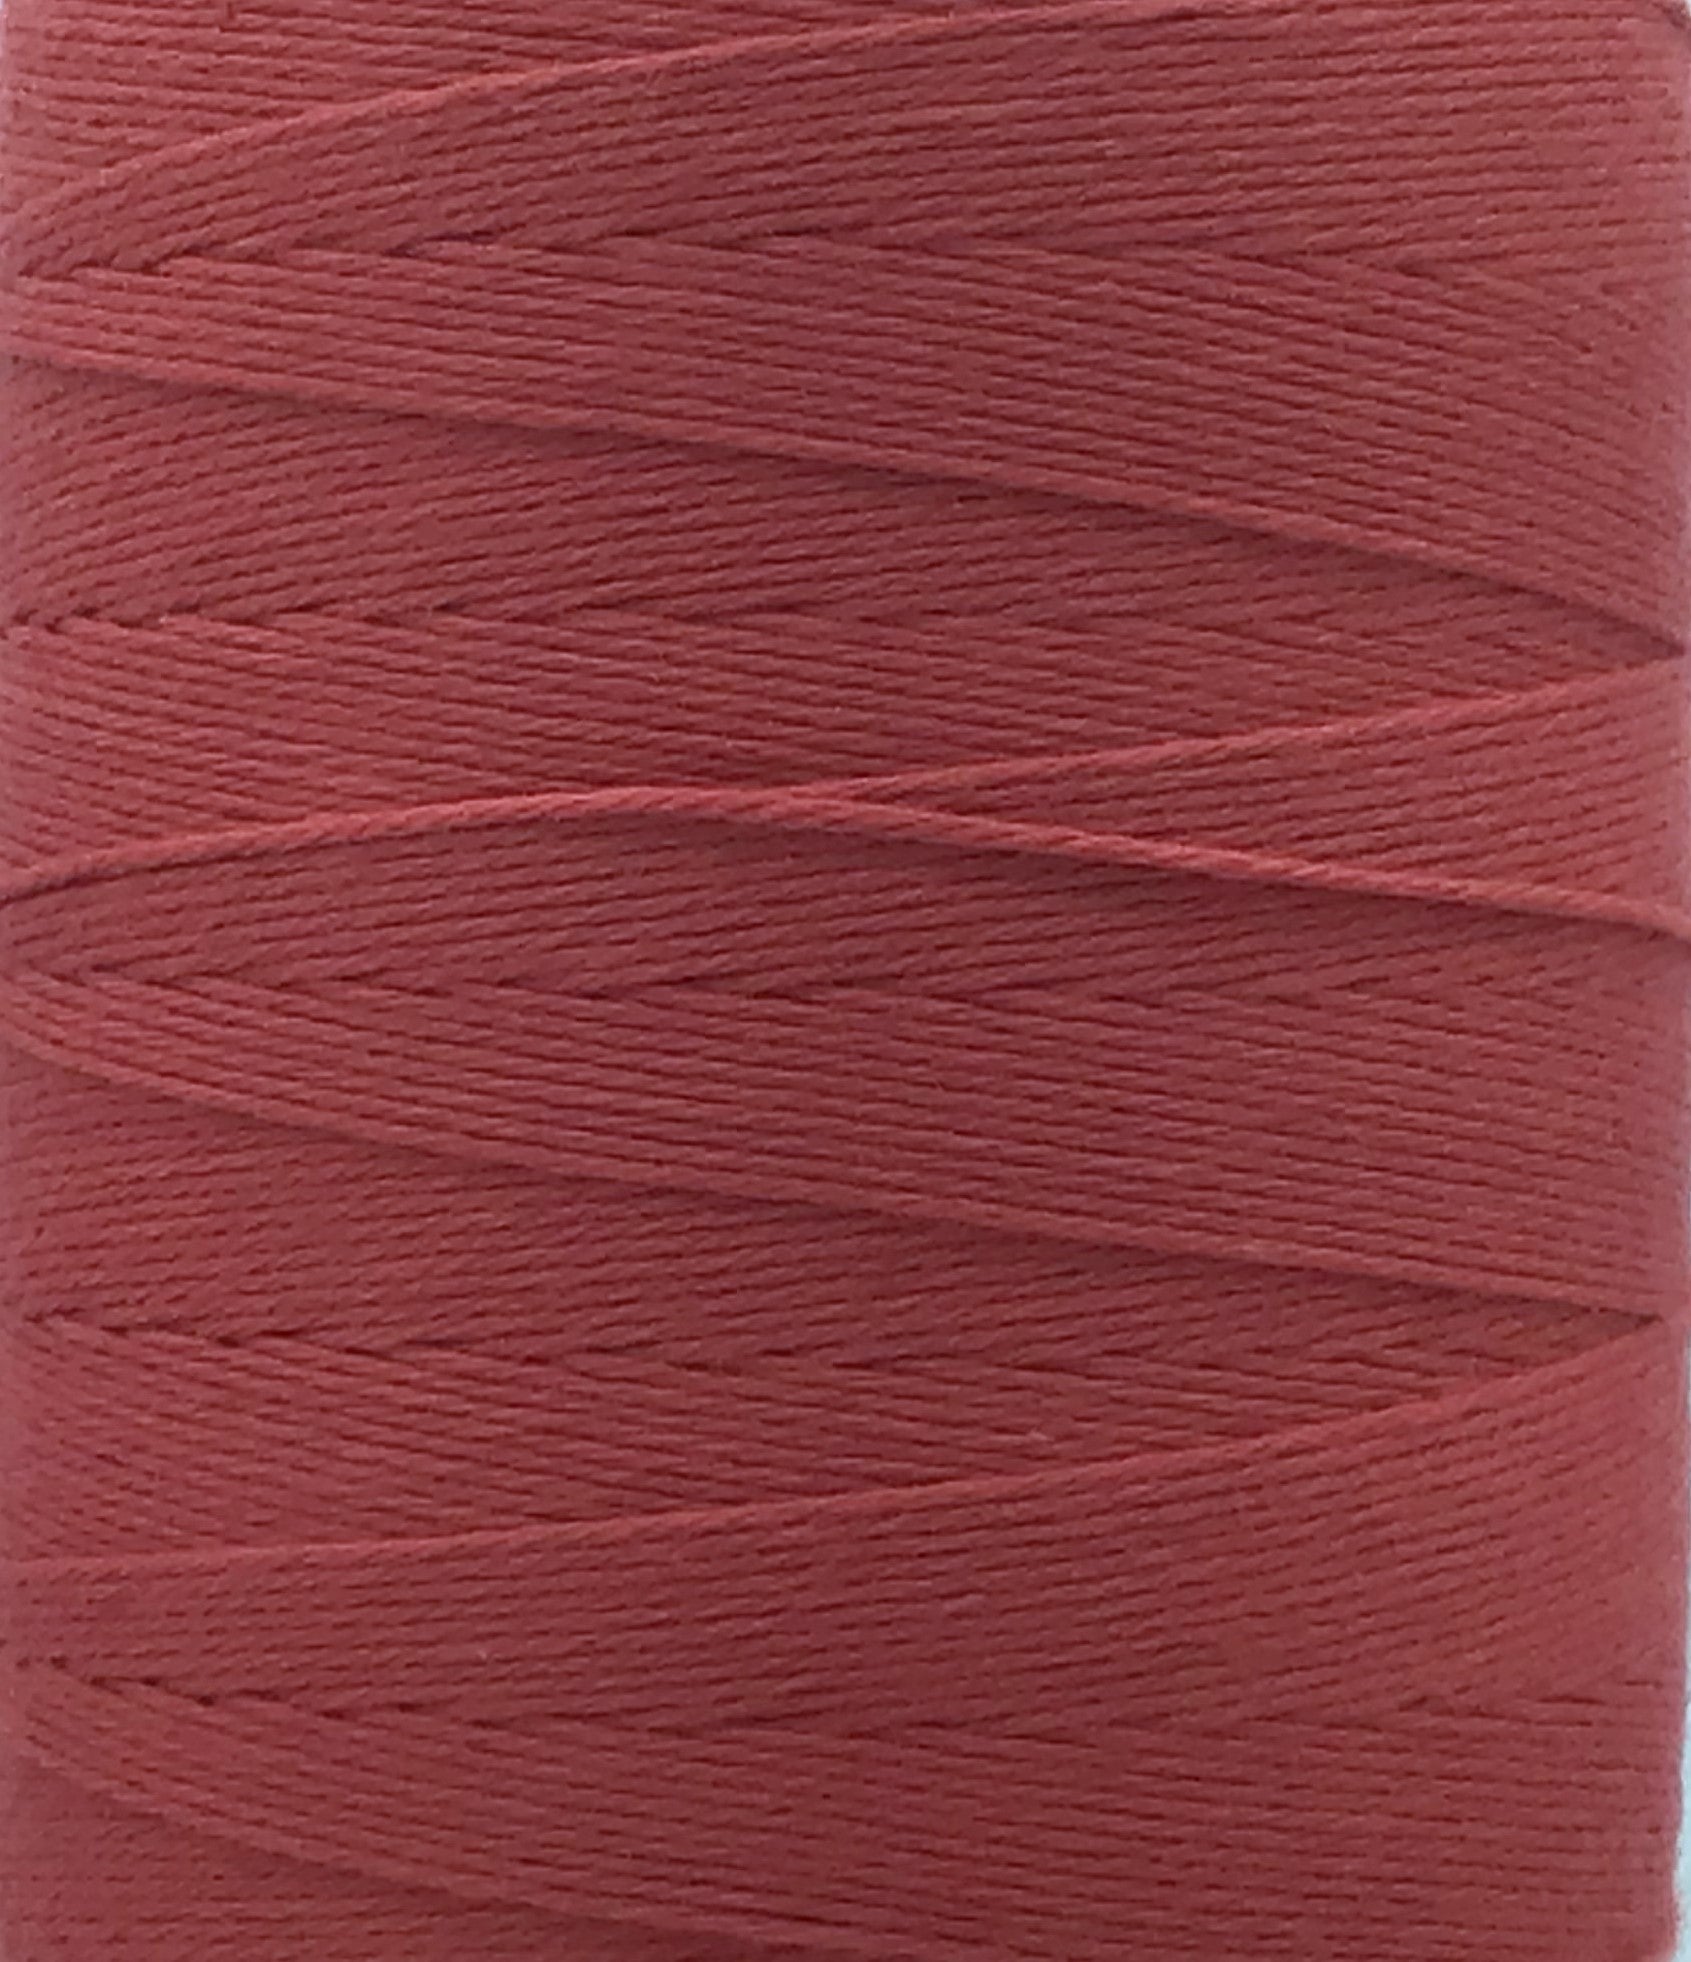 100% Cotton Yarn 8/4 for Thick Textiles - MD Weaving